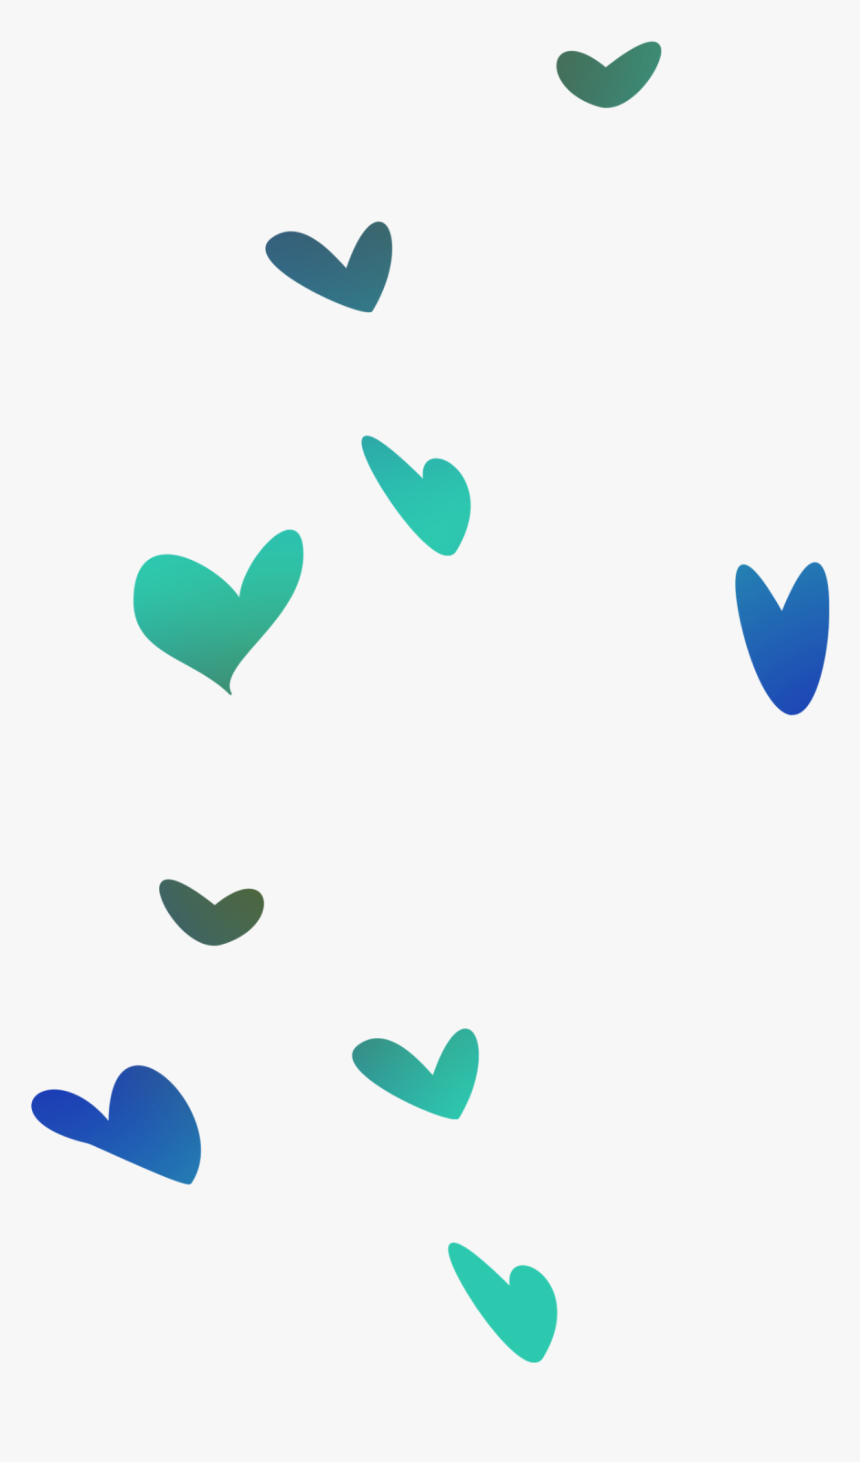 #mq #green #blue #heart #falling #hearts - Transparent Teal Hearts, HD Png Download, Free Download